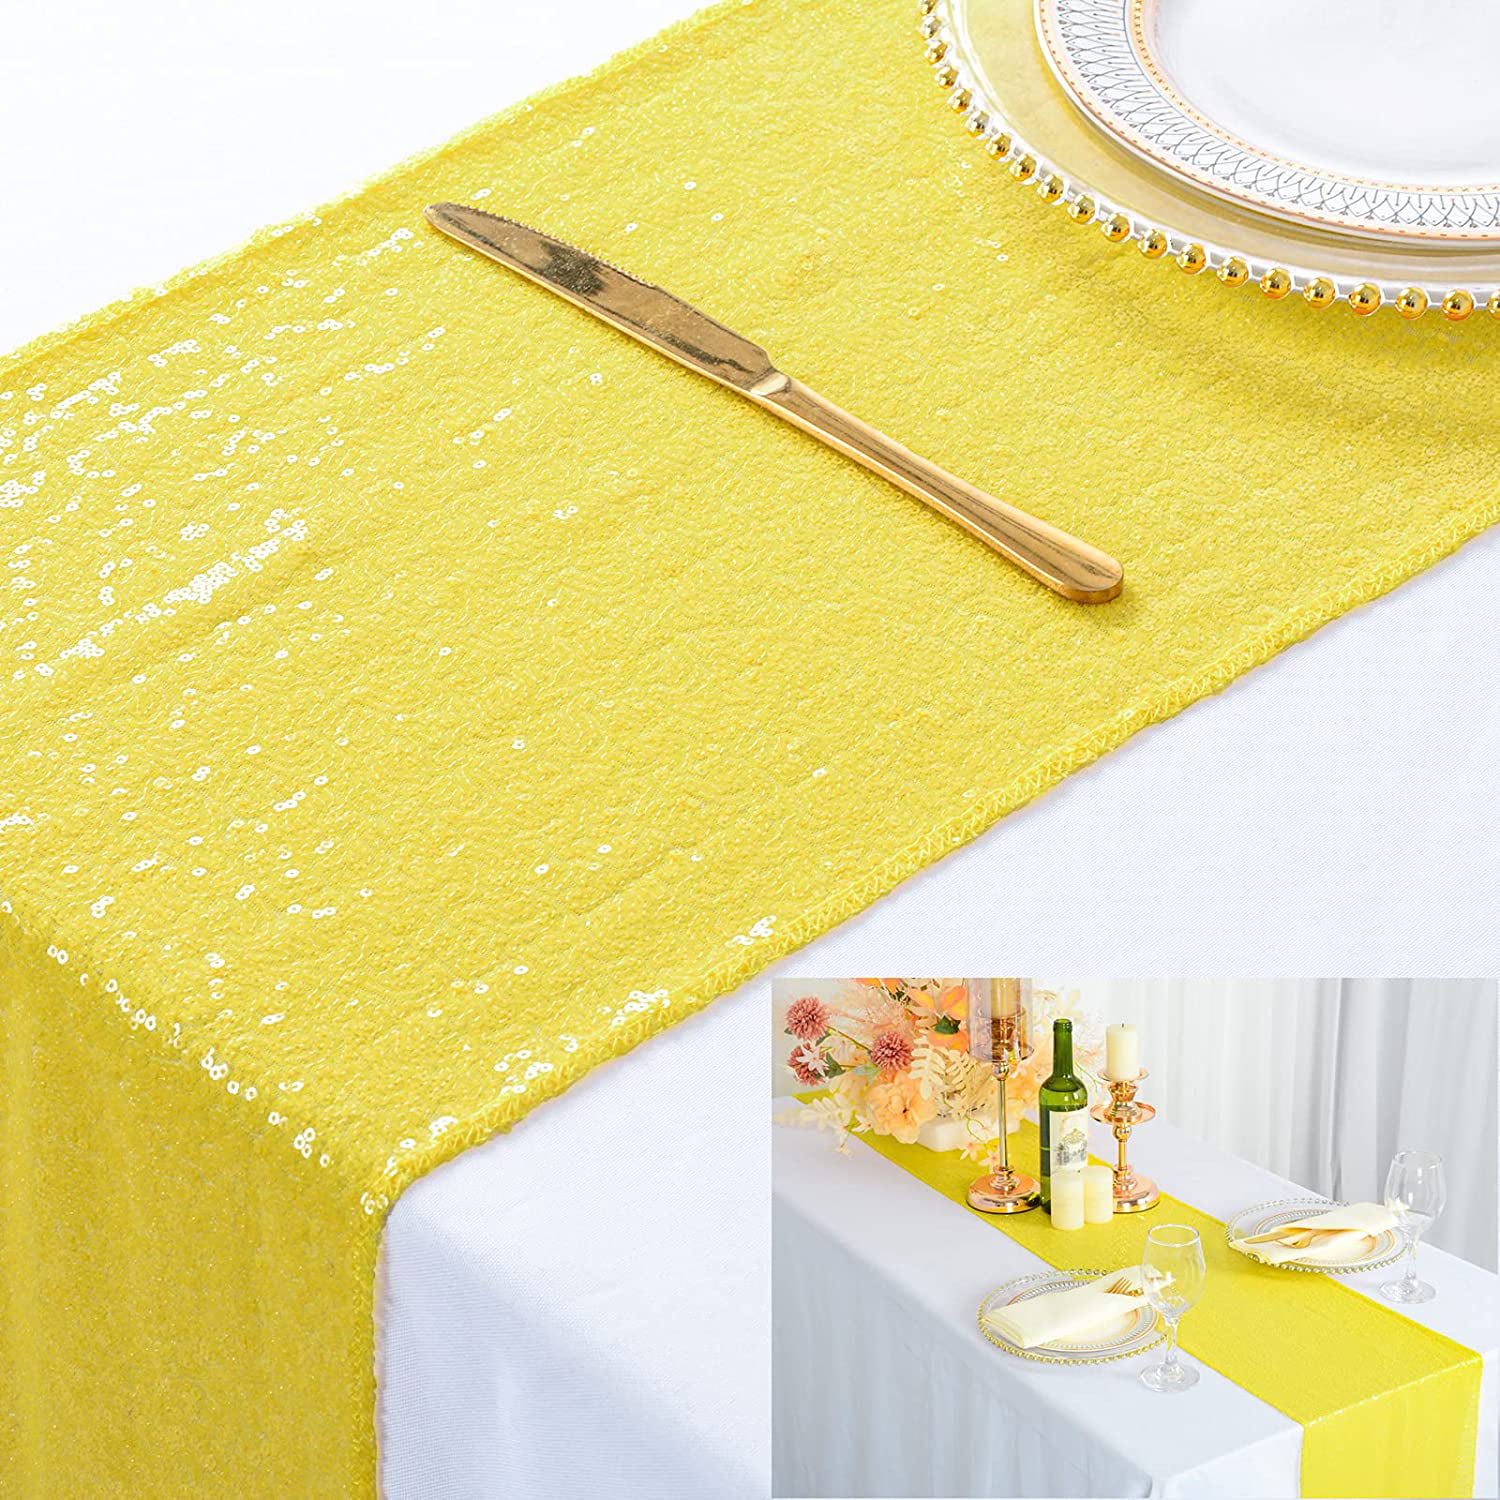 Details about   New Hearth & Hand Oversized Linen and Cotton Striped Table Runner 20"X90" 